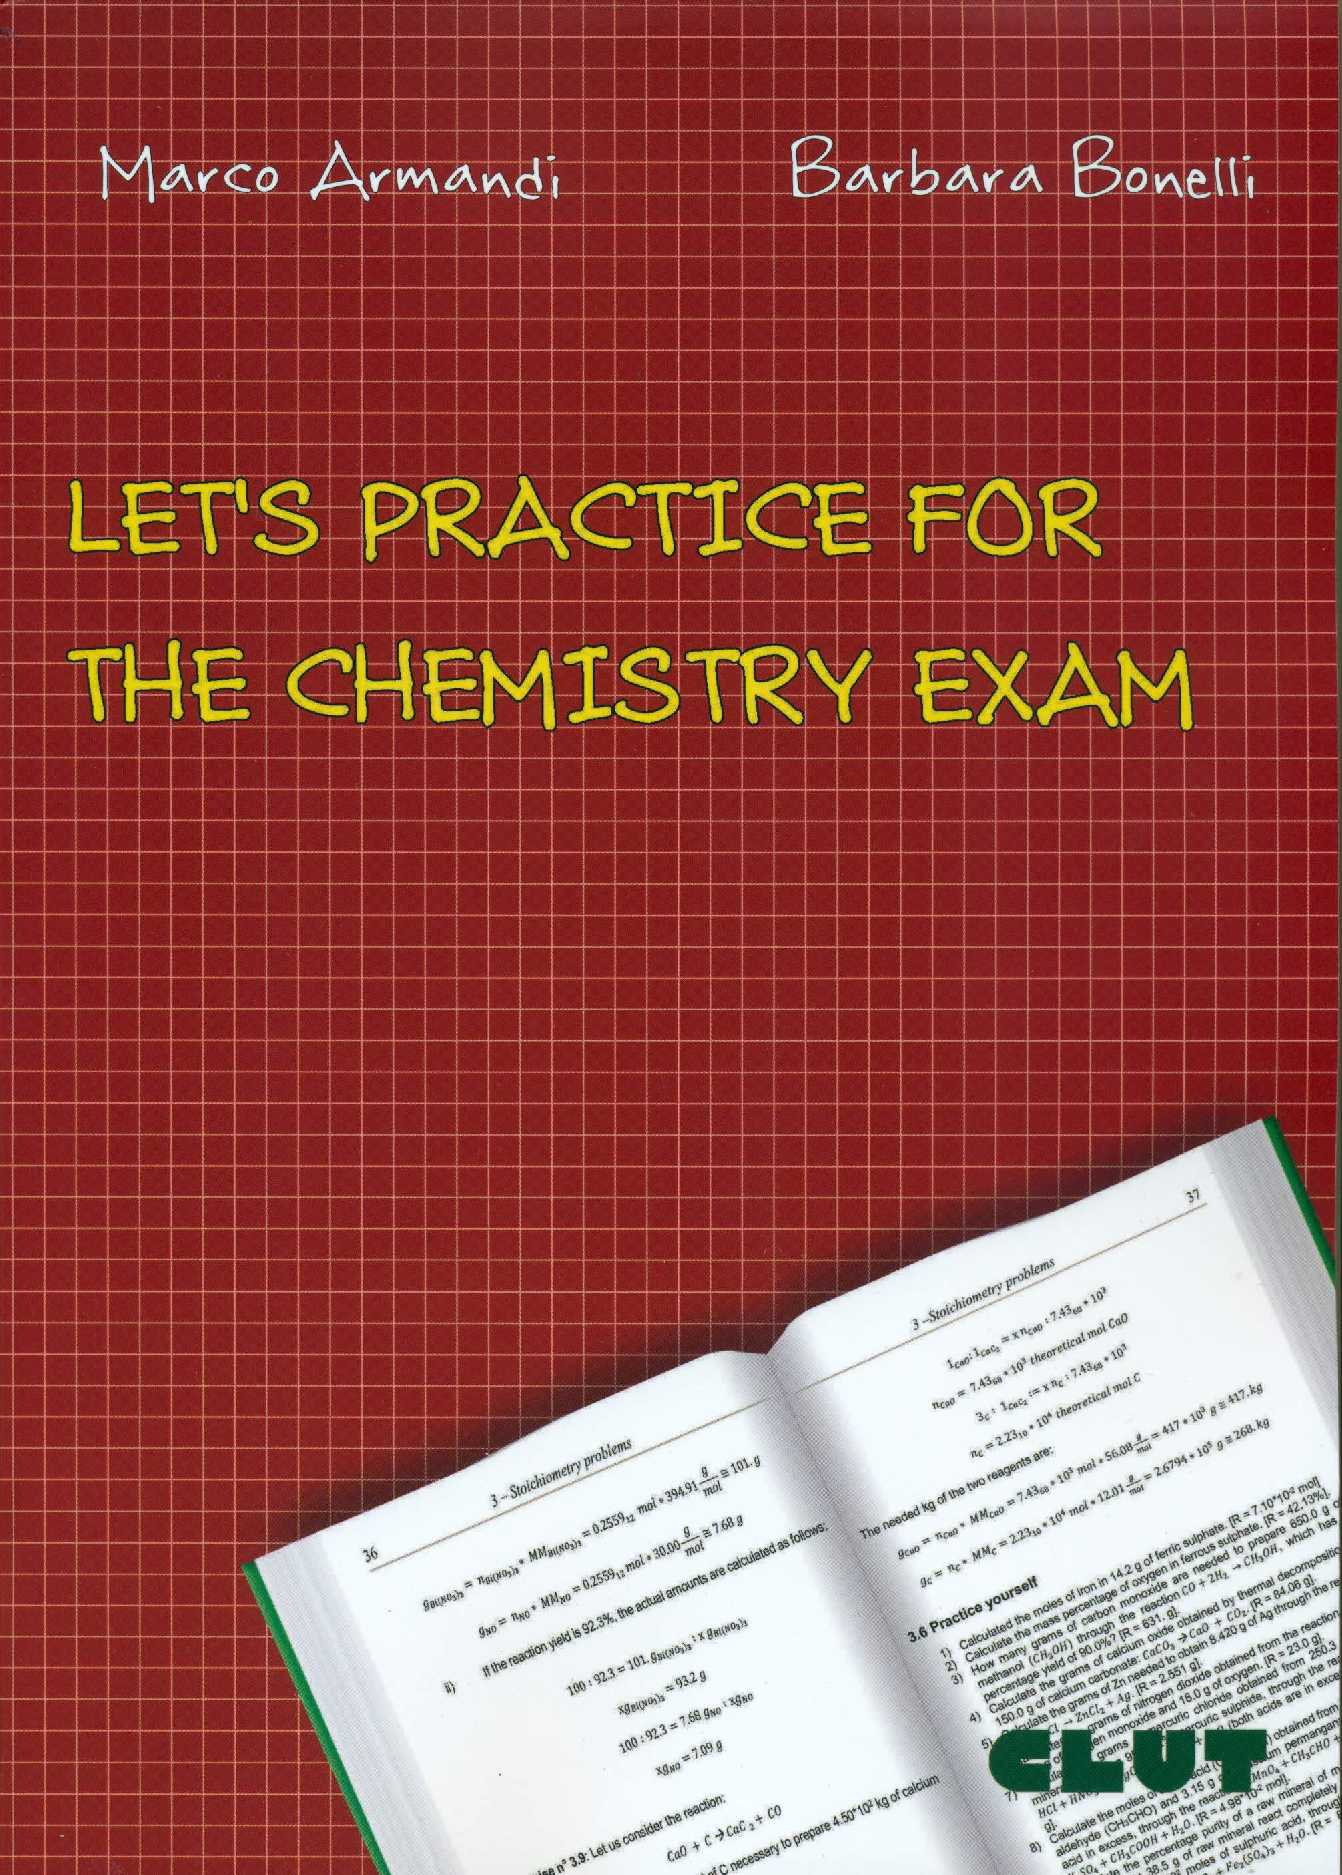 LET'S PRACTICE FOR THE CHEMISTRY EXAM